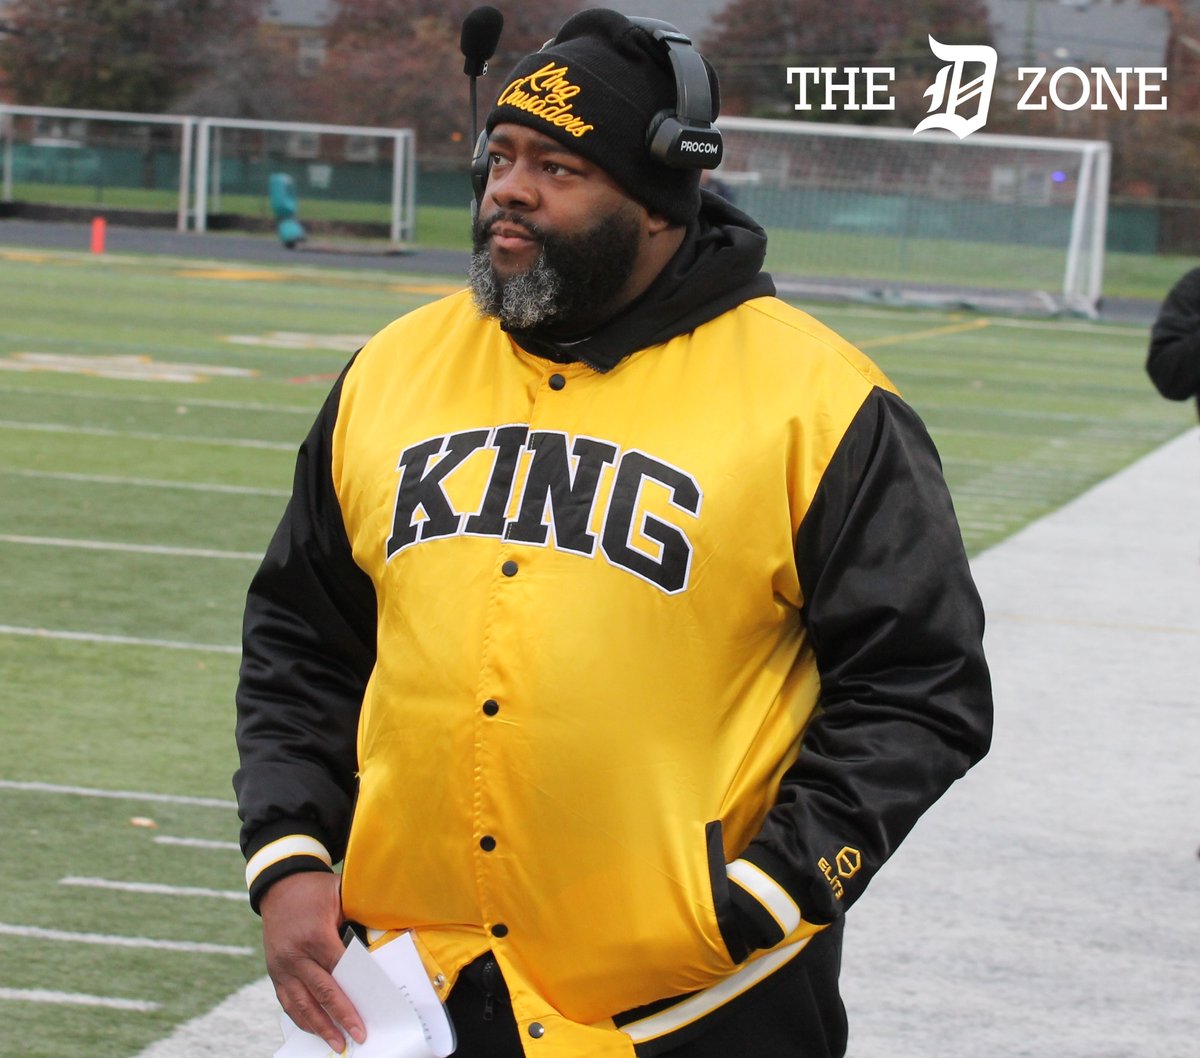 East Kentwood has hired Tyrone Spencer as their next head football coach. football.thedzone.com/coaches/tyrone…